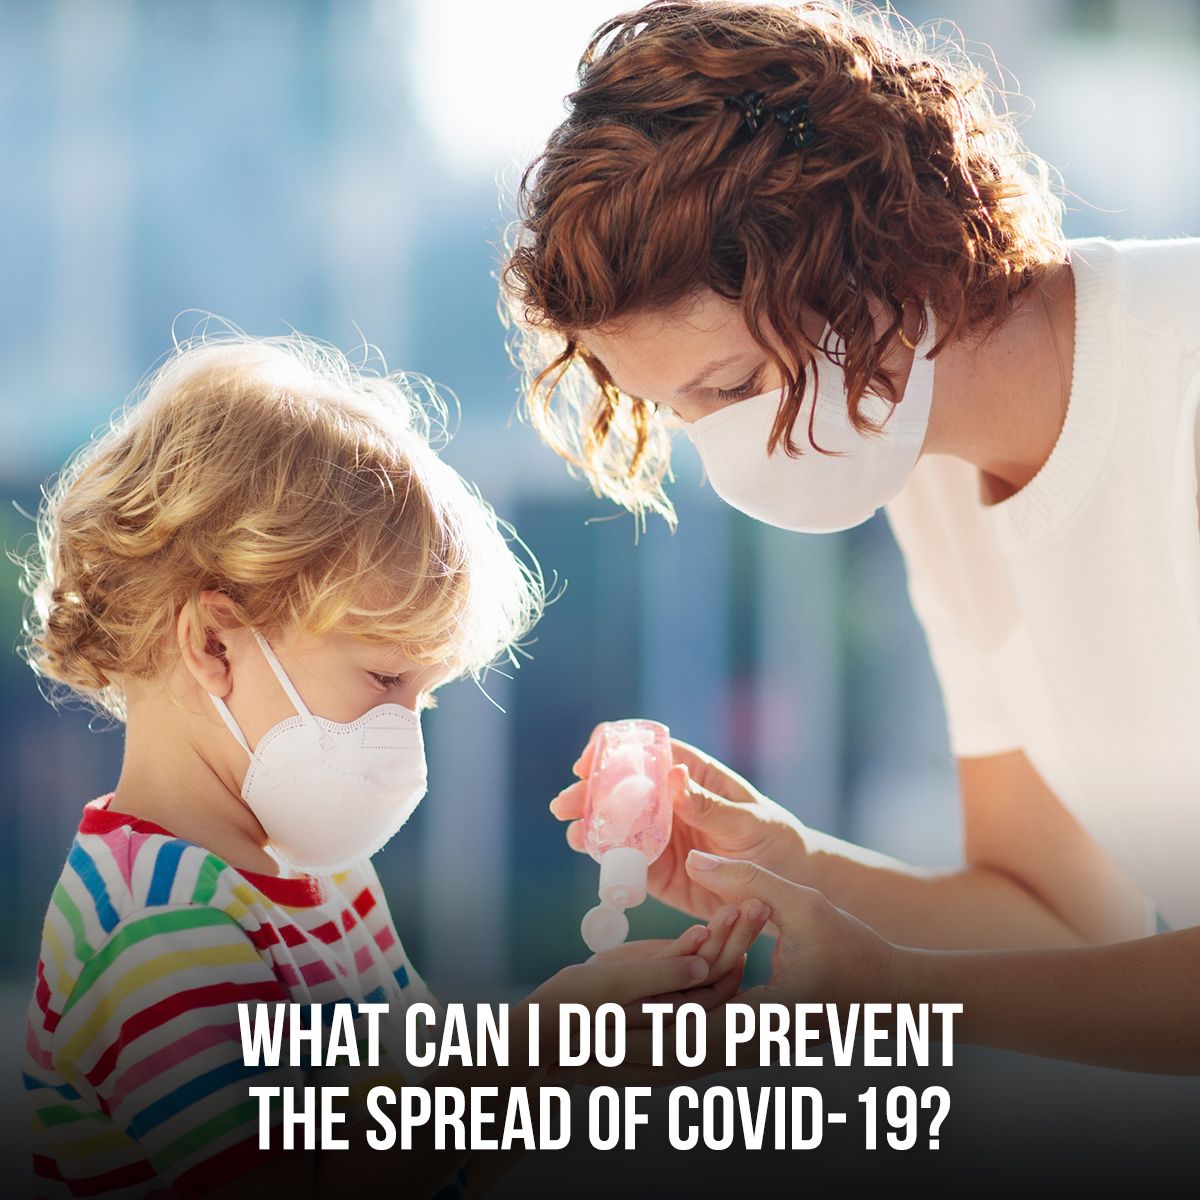 What Can I Do to Prevent the Spread of COVID-19?